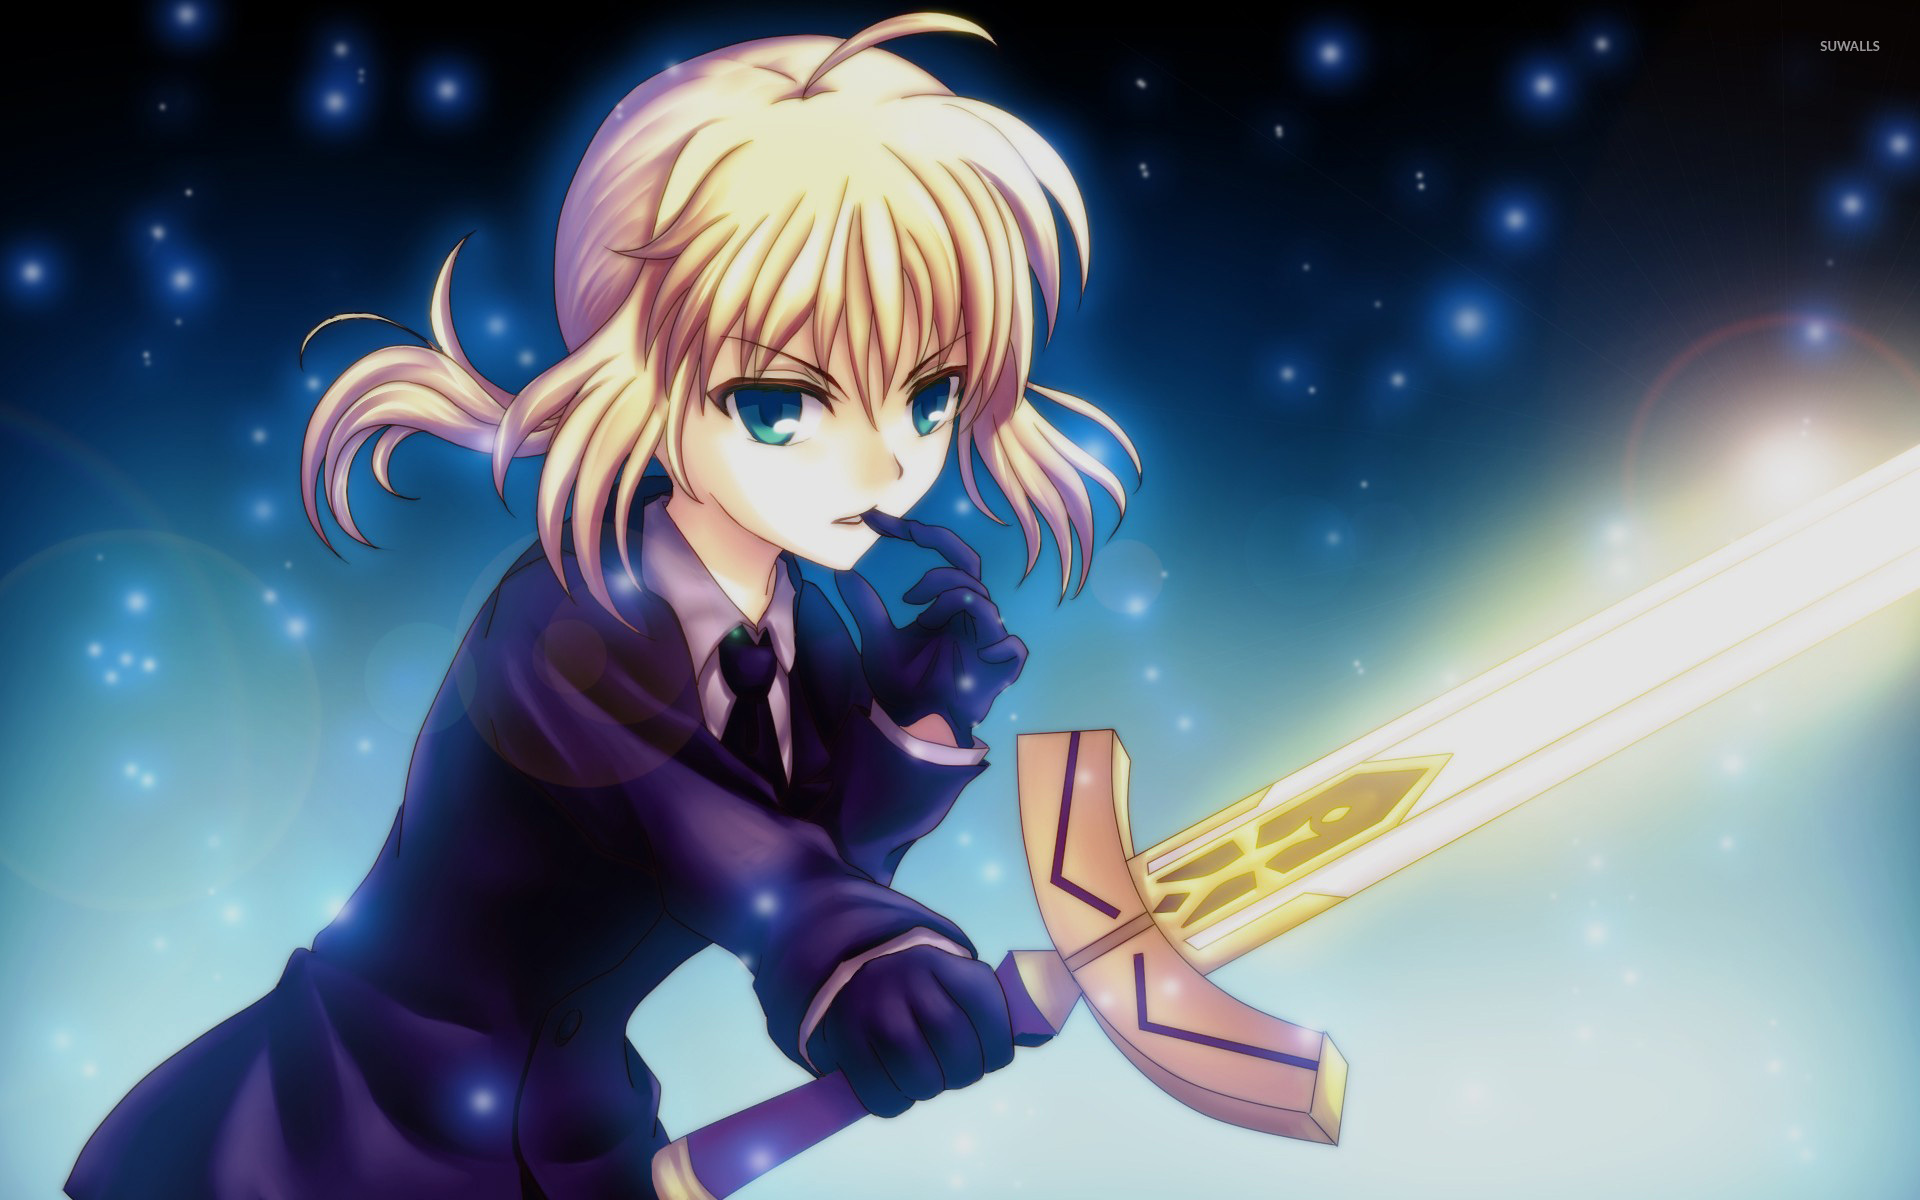 Saber Fatestay night wallpaper Anime wallpapers